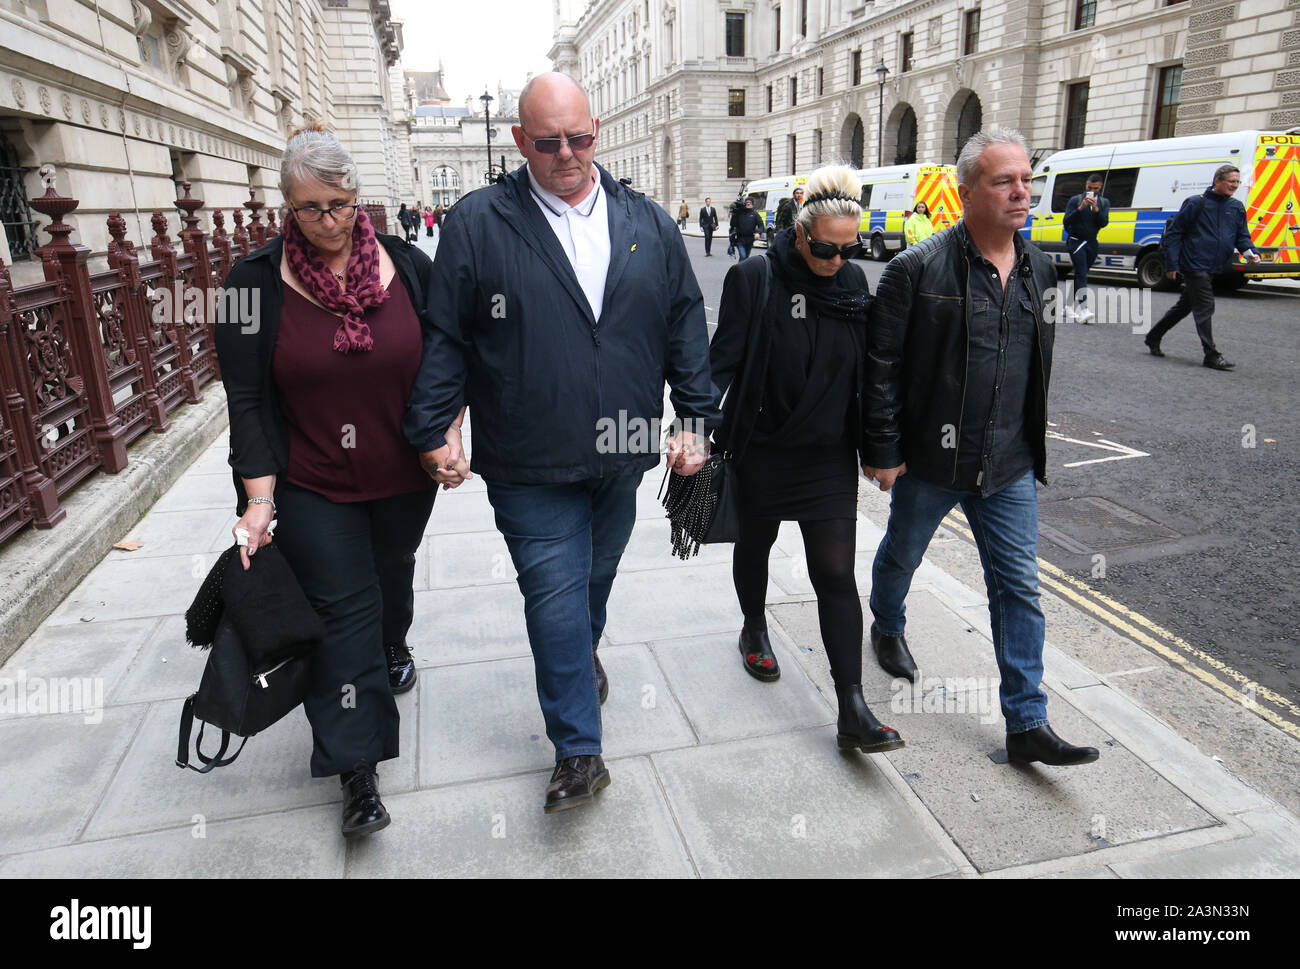 The family of Harry Dunn, mother Charlotte Charles (second right) and father Tim Dunn (second left) leaving the Foreign and Commonwealth Office in London, where they met Foreign Secretary Dominic Raab. 19-year-old Harry was killed when his motorbike crashed into a car on August 27. The suspect in the case, 42-year-old Anne Sacoolas, was granted diplomatic immunity after the crash, but Prime Minister Boris Johnson, Mr Raab and Northamptonshire Police have asked the US to consider waiving it. Stock Photo